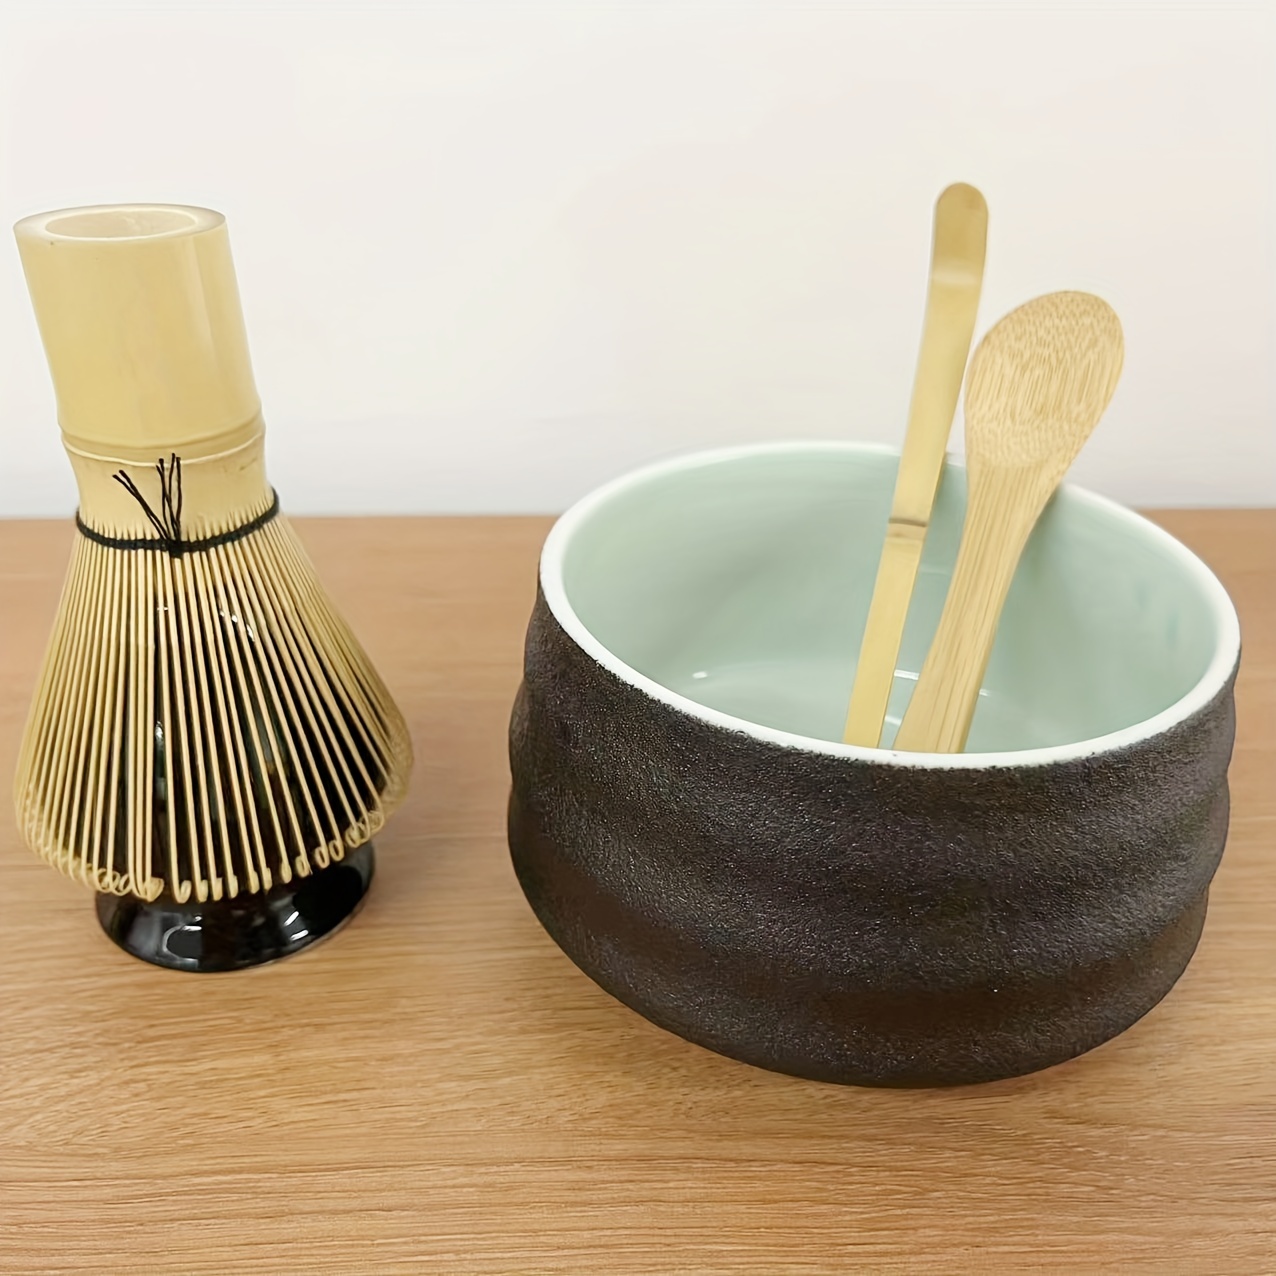 Bamboo Matcha Tea Whisk, Scoop and Small Spoon 